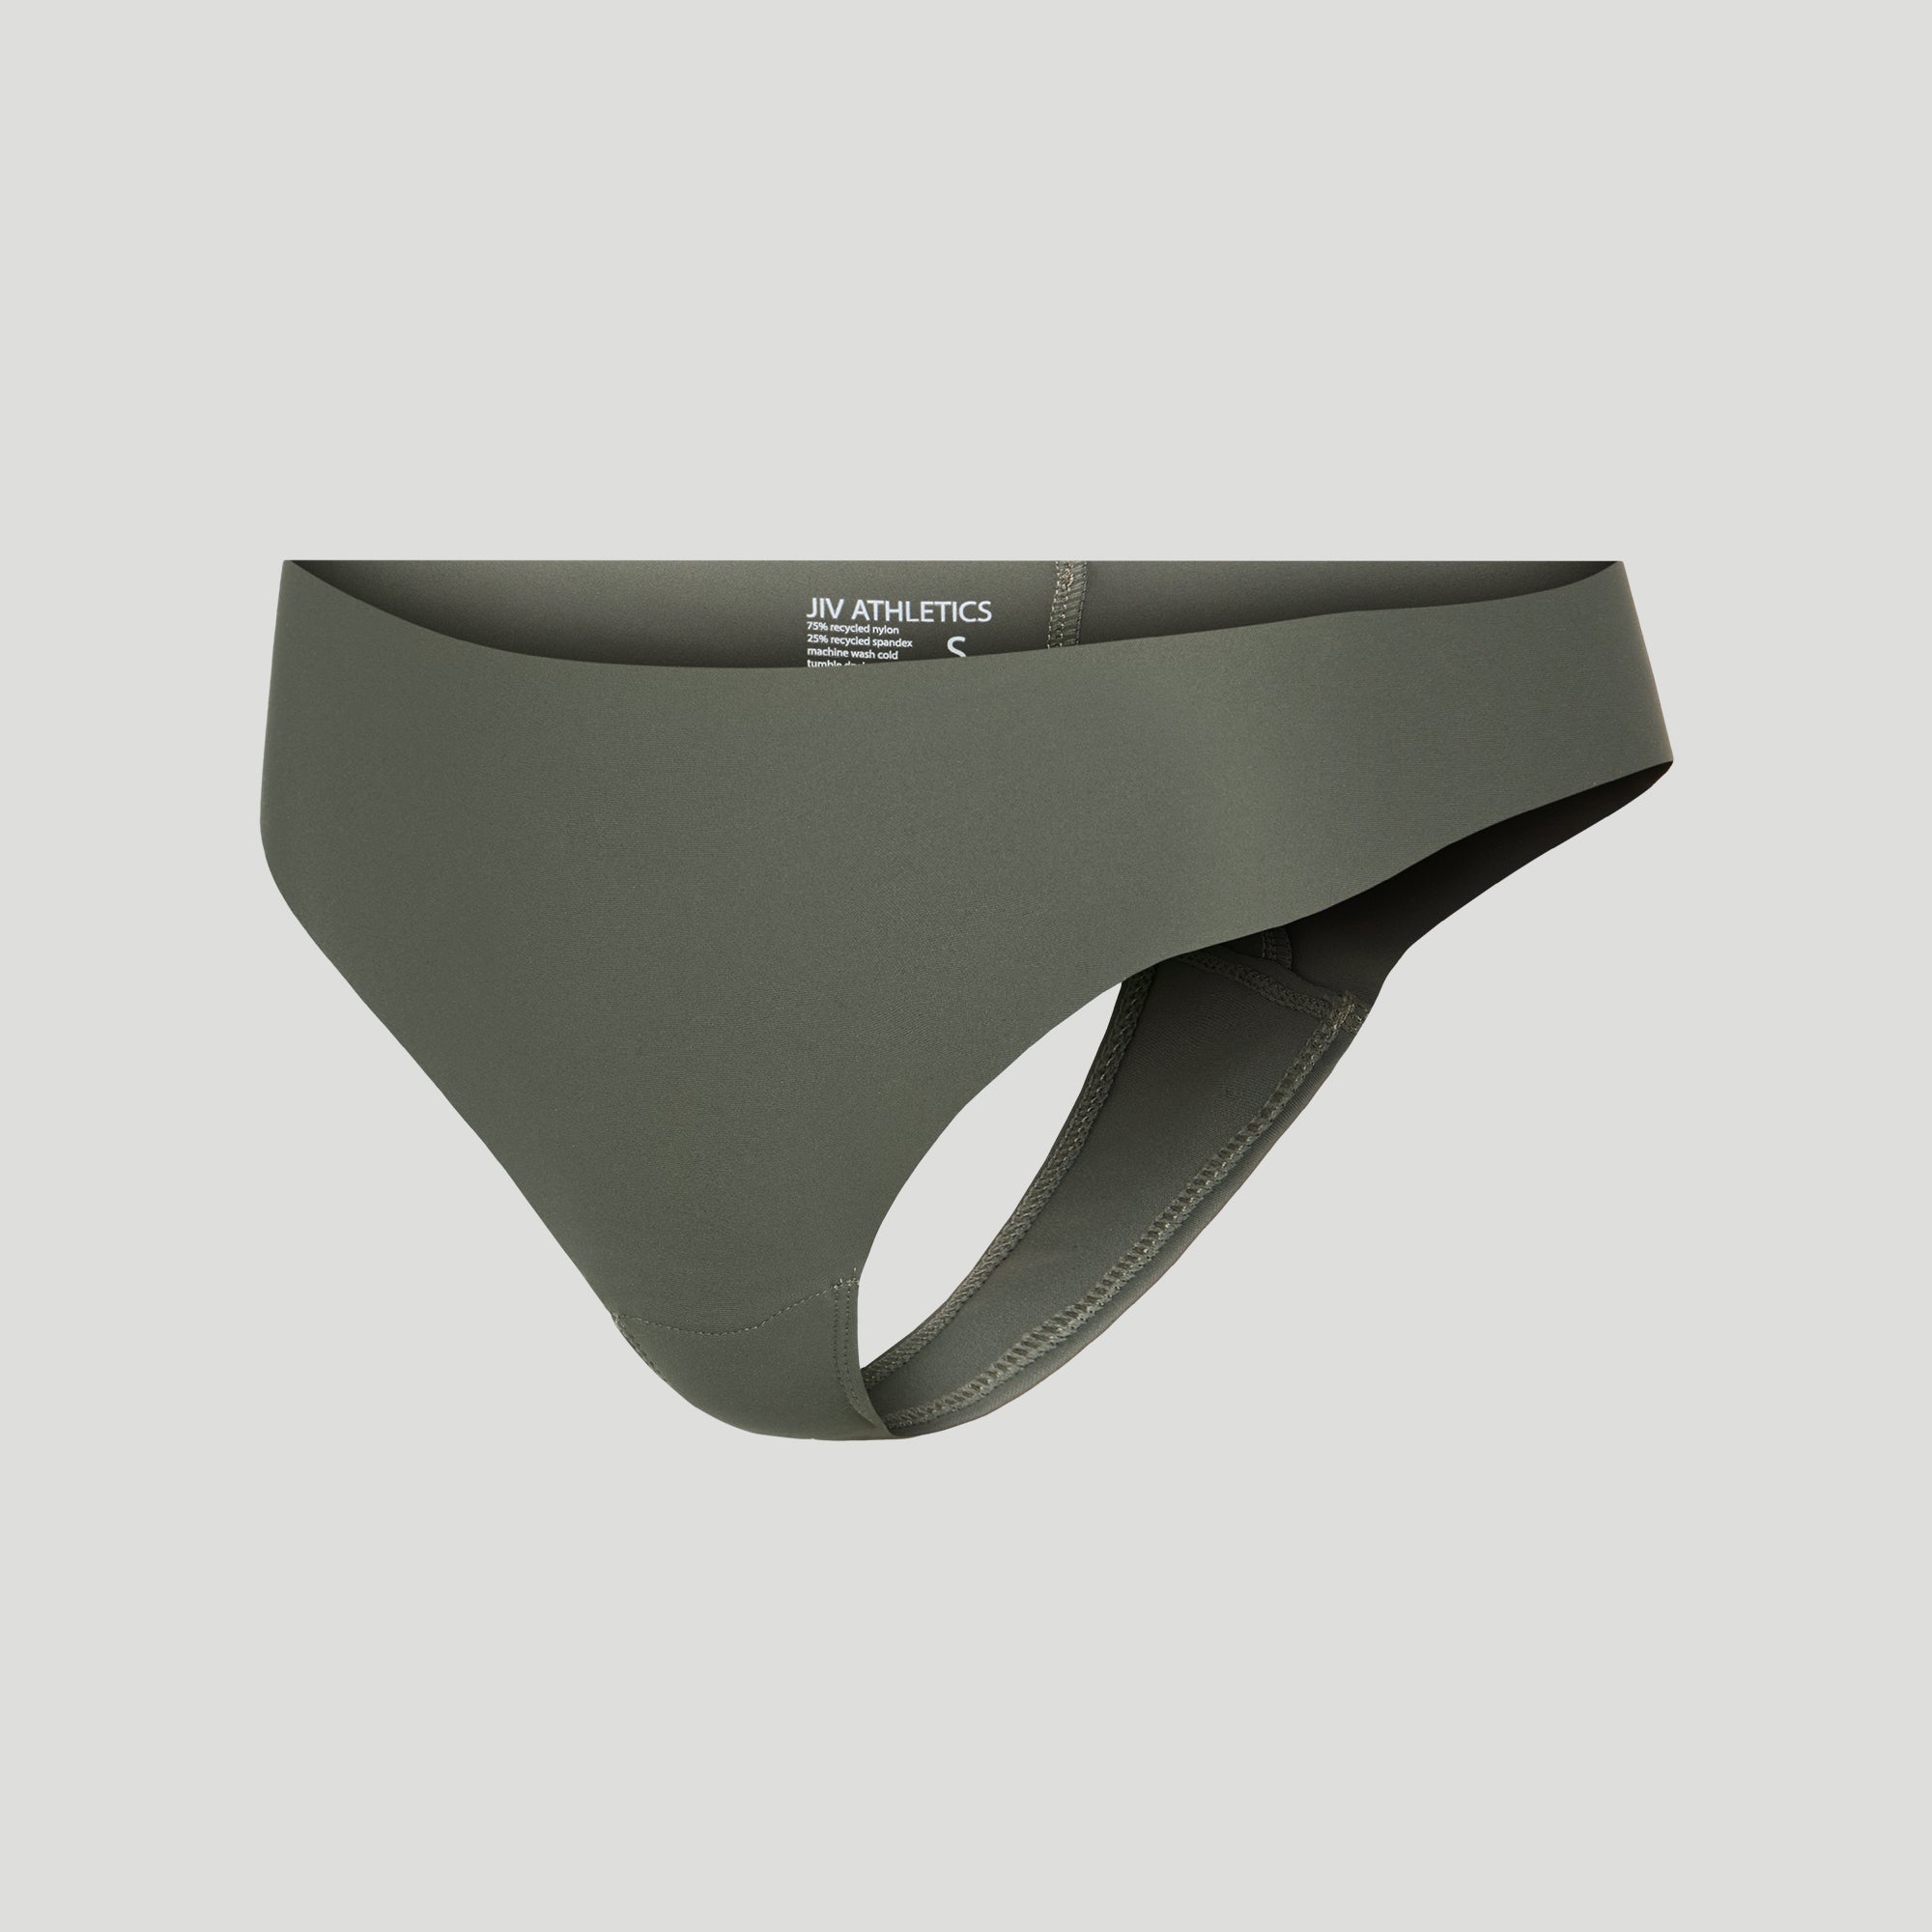 JIV ATHLETICS The Cameltoe Proof Low Rise Thong in Black